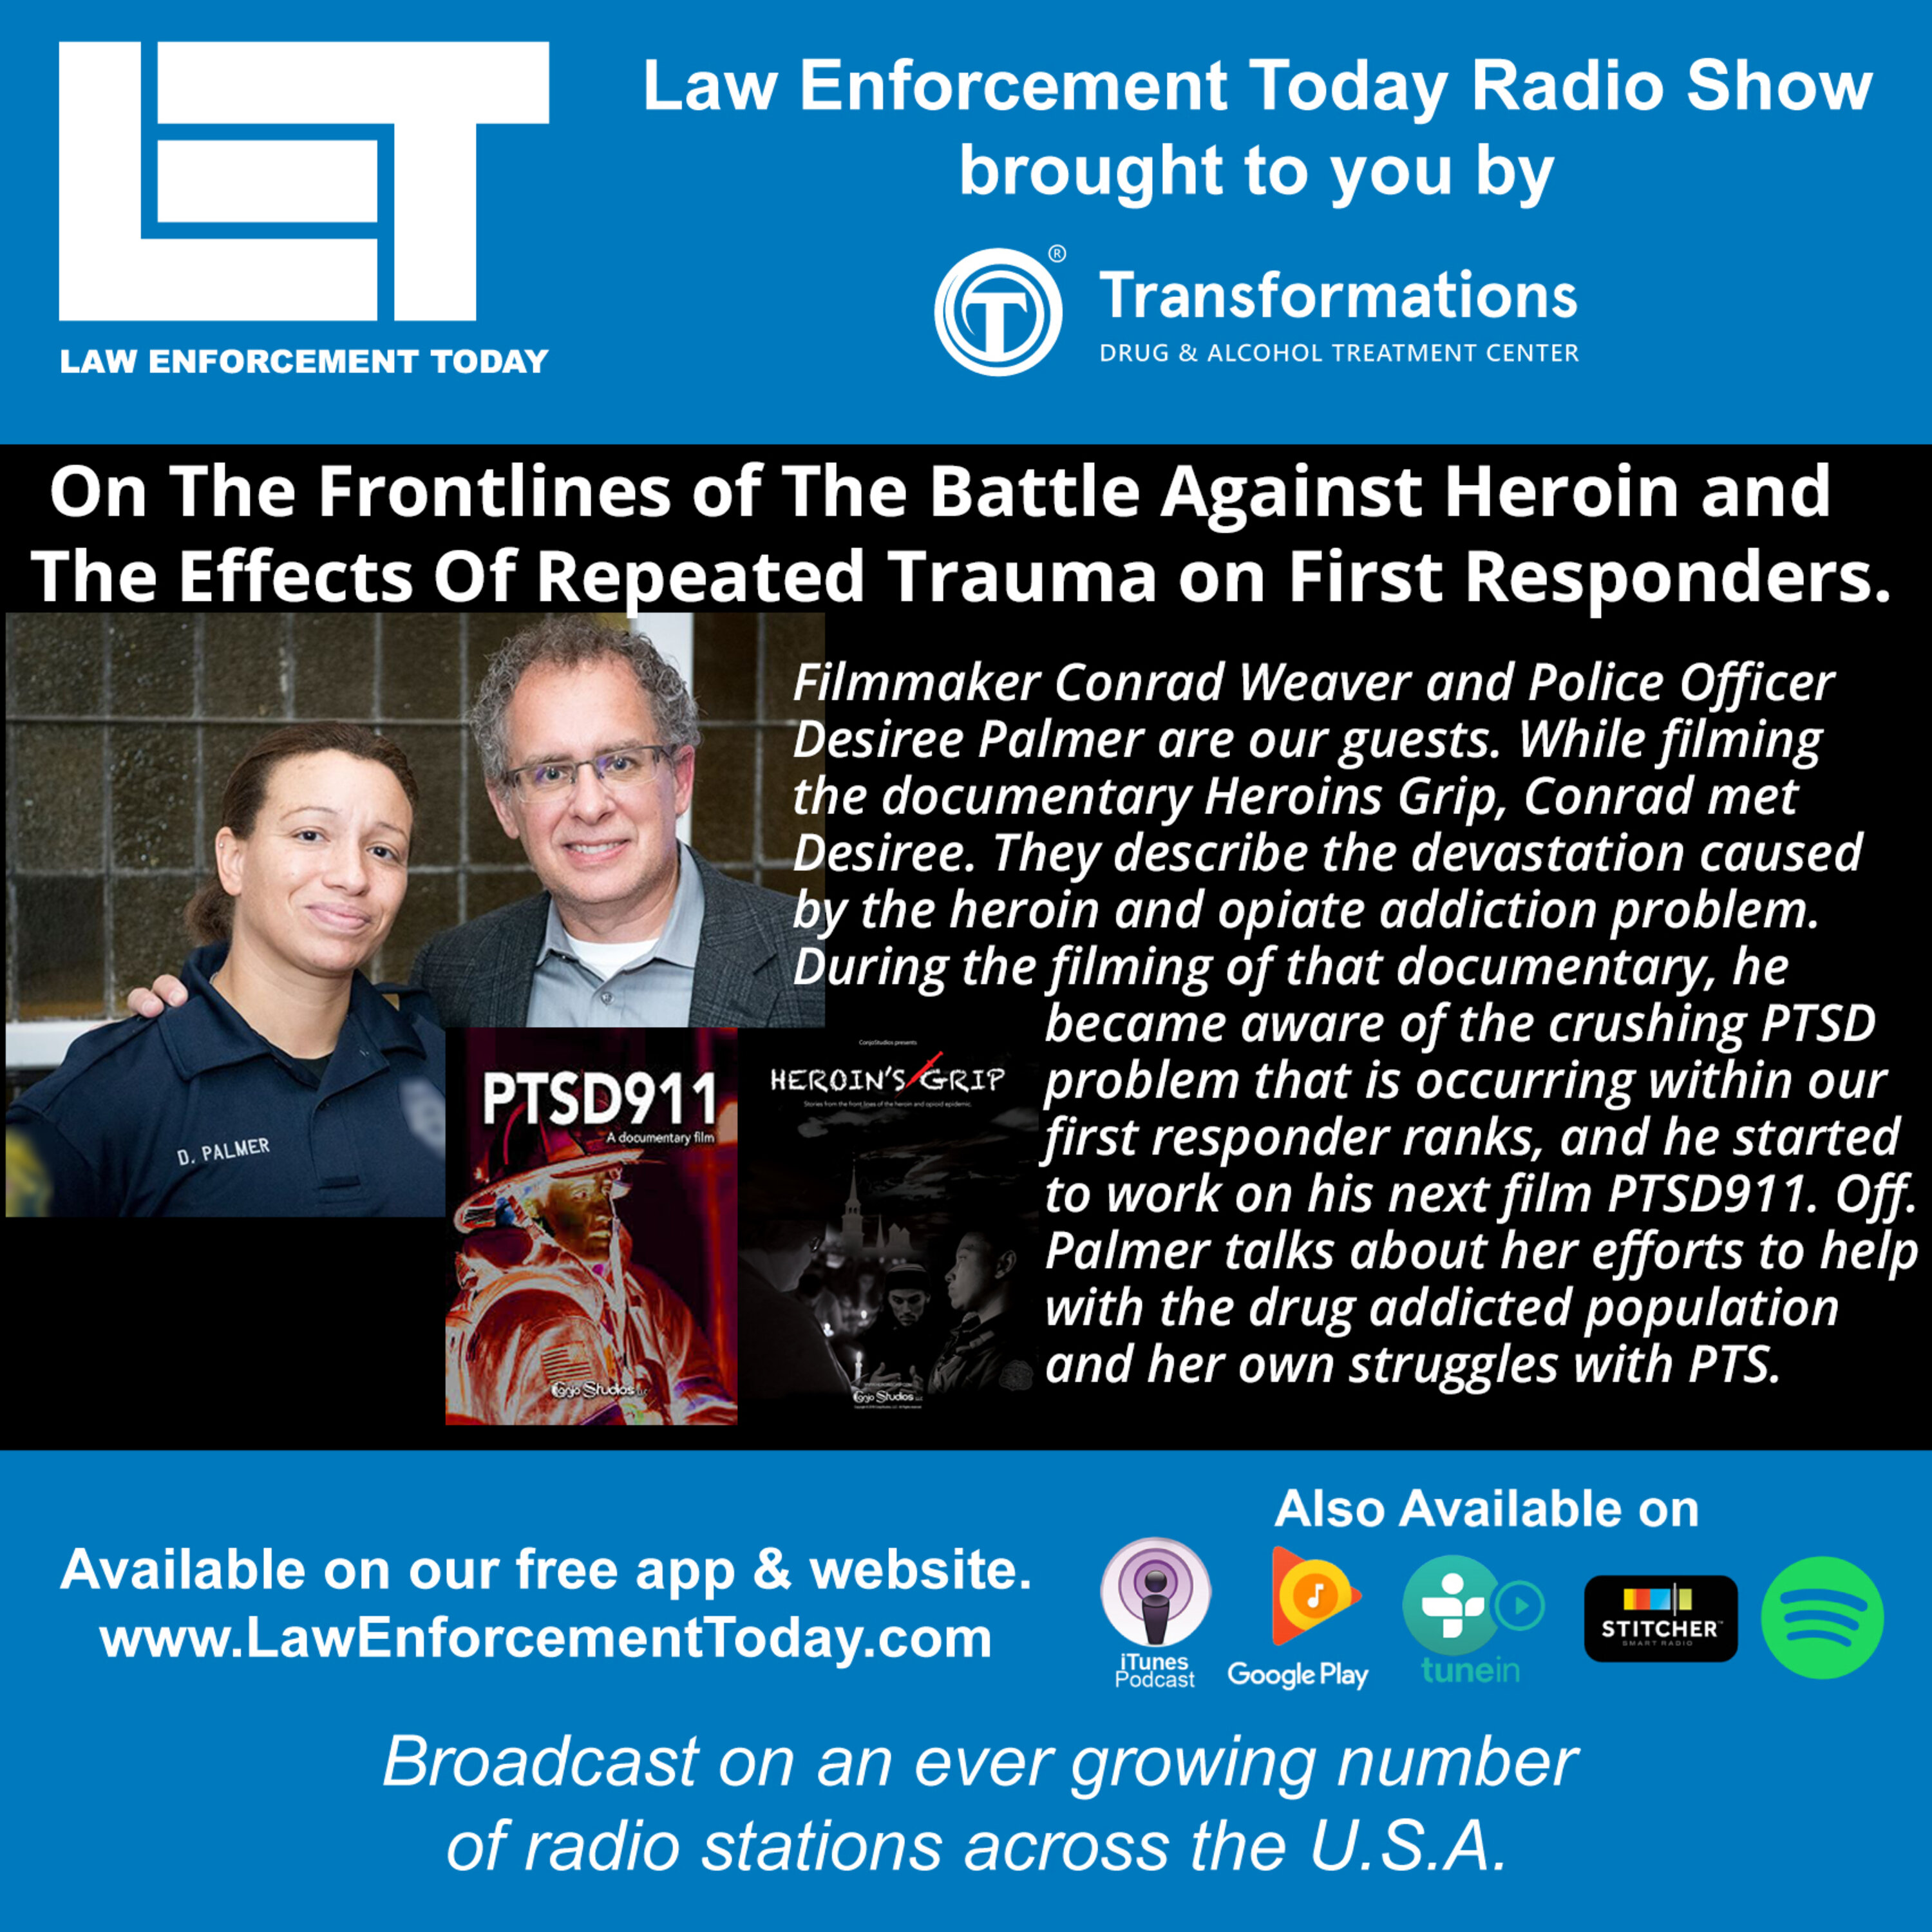 S4E27: On The Frontlines of The Battle Against Heroin and The Effects Of Repeated Trauma on First Responders.